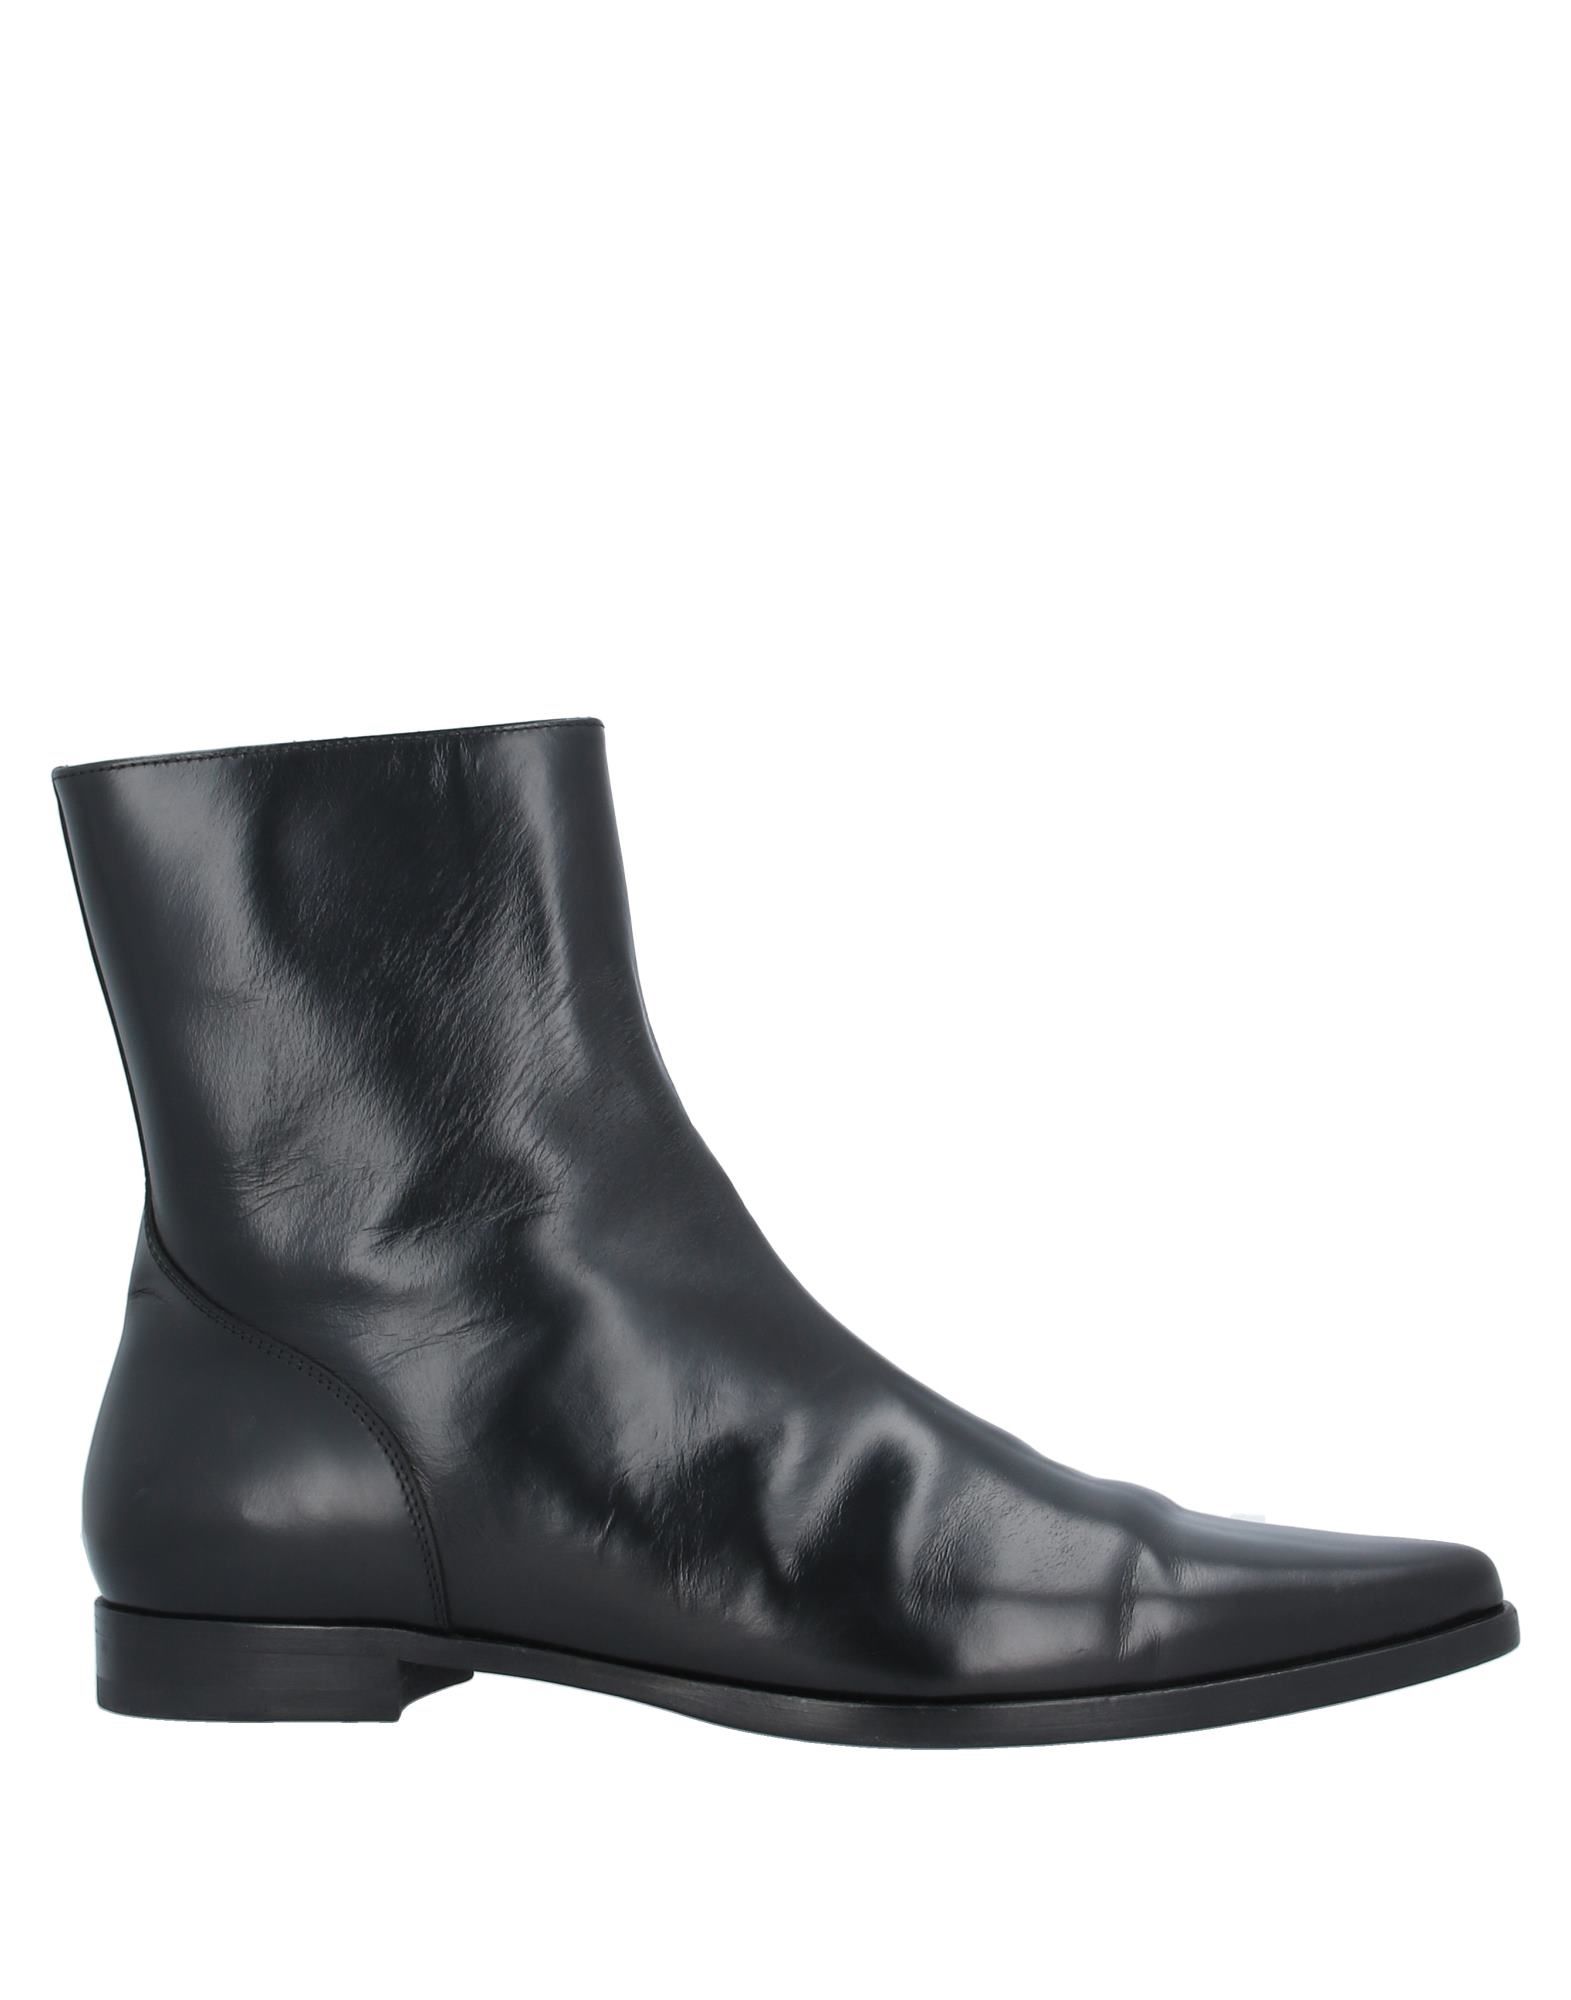 DSQUARED2 Ankle boots - Item 11947398